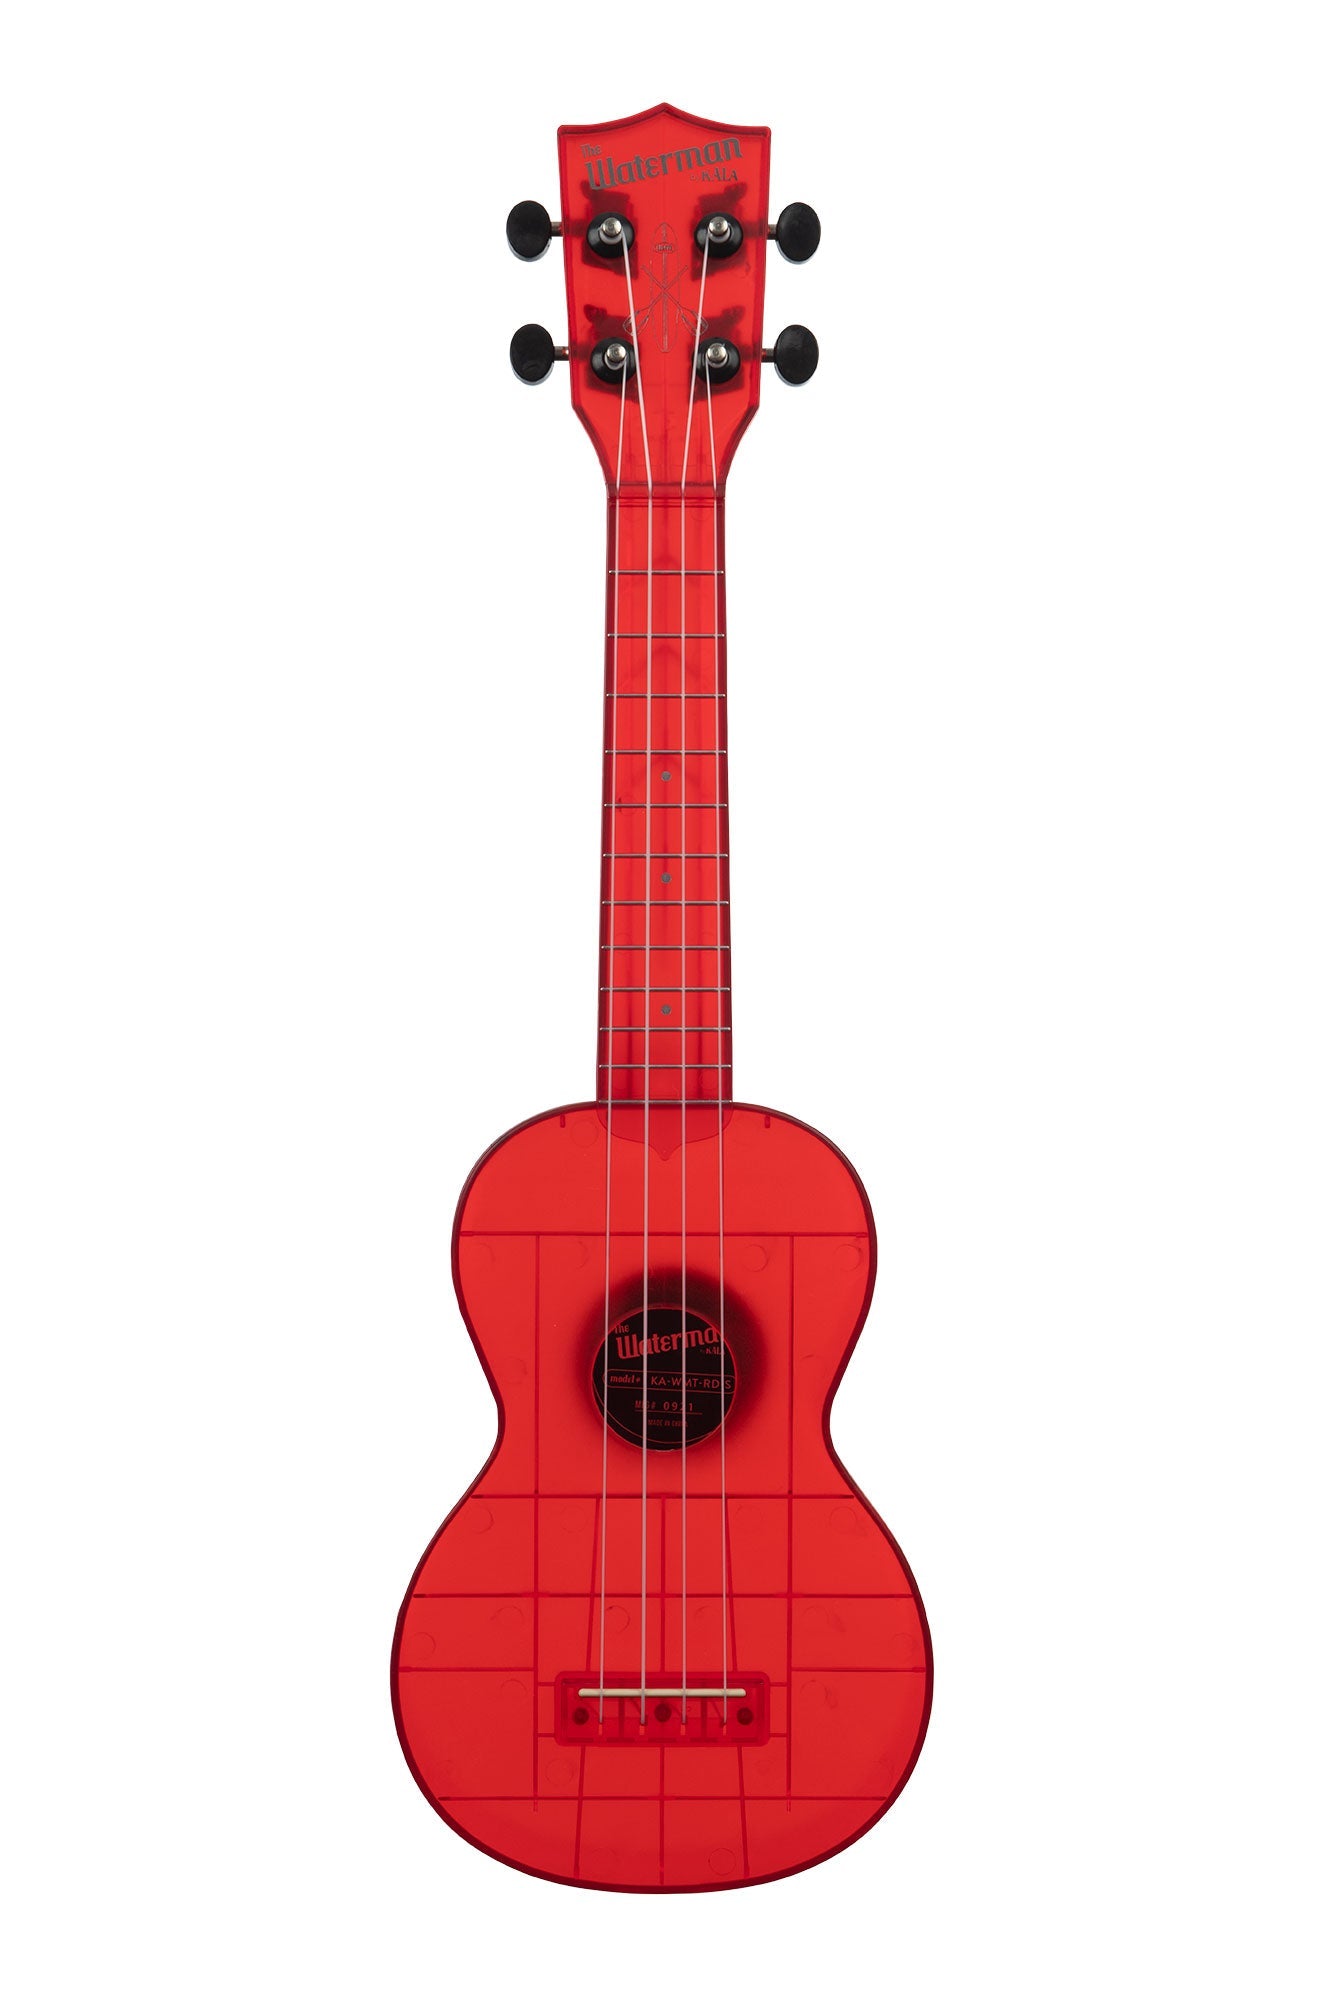 Maritime Red Transparent: Learn to Play The Waterman Ukulele by Kala